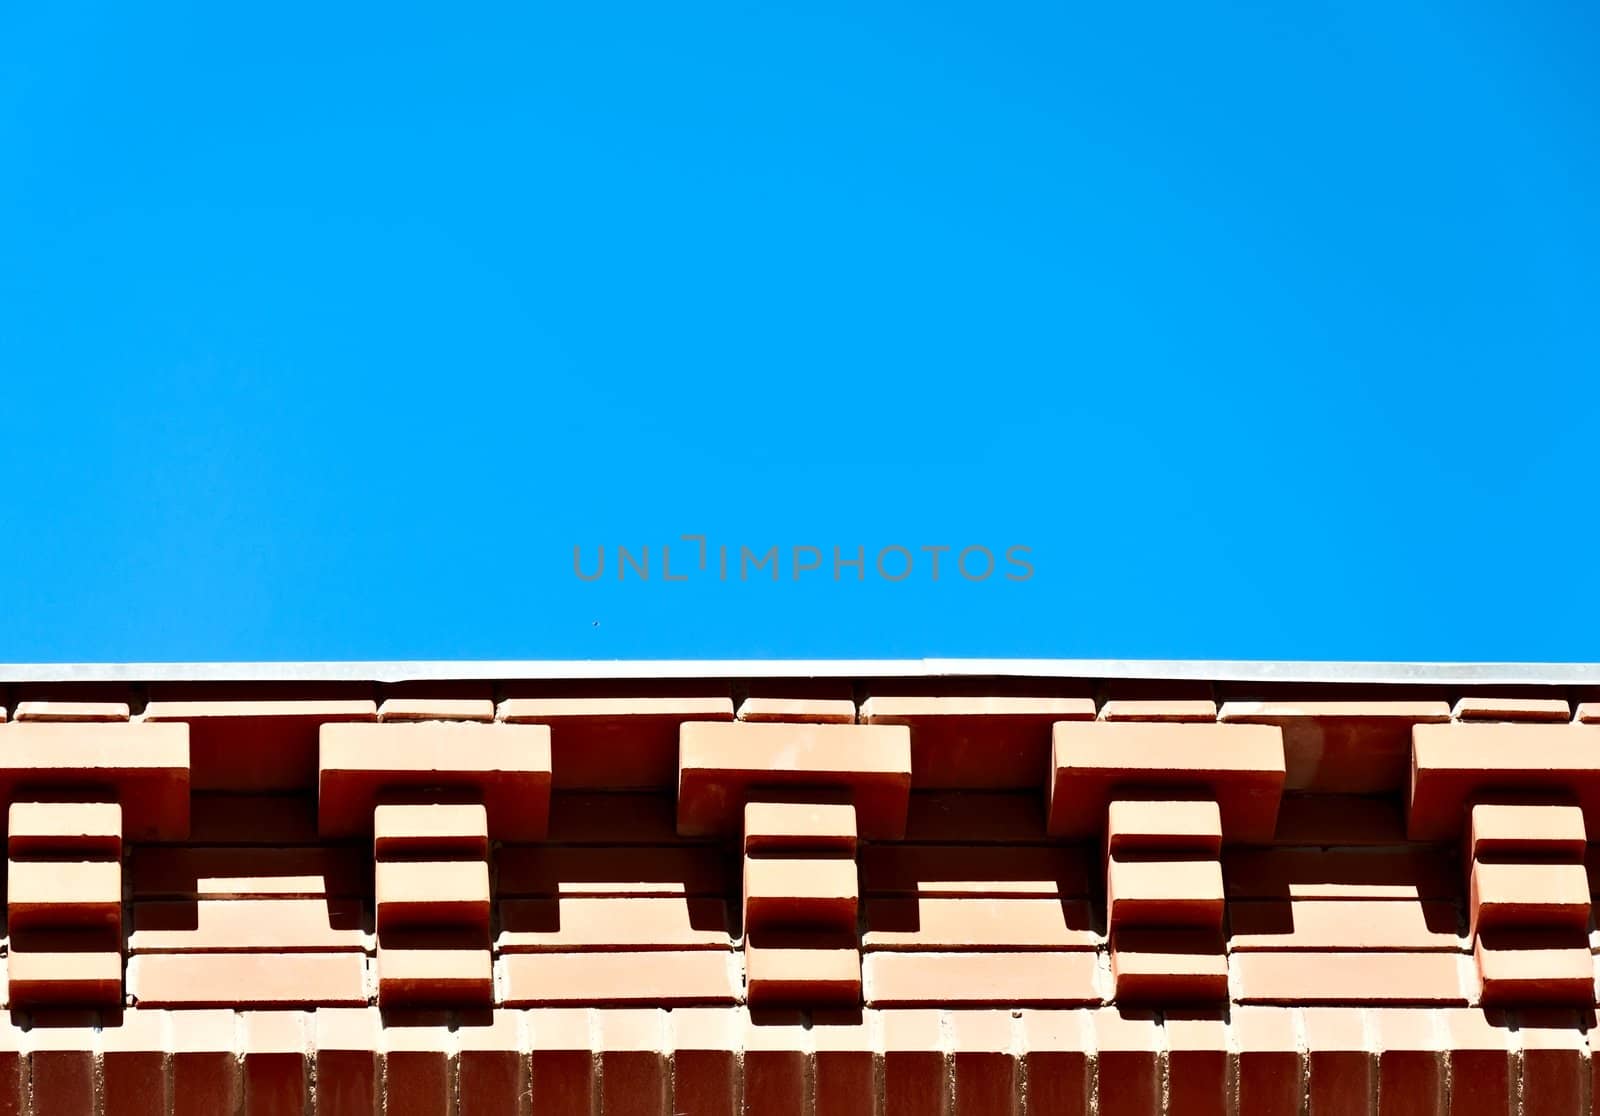 Architectural background - brick eaves against the blue sky.